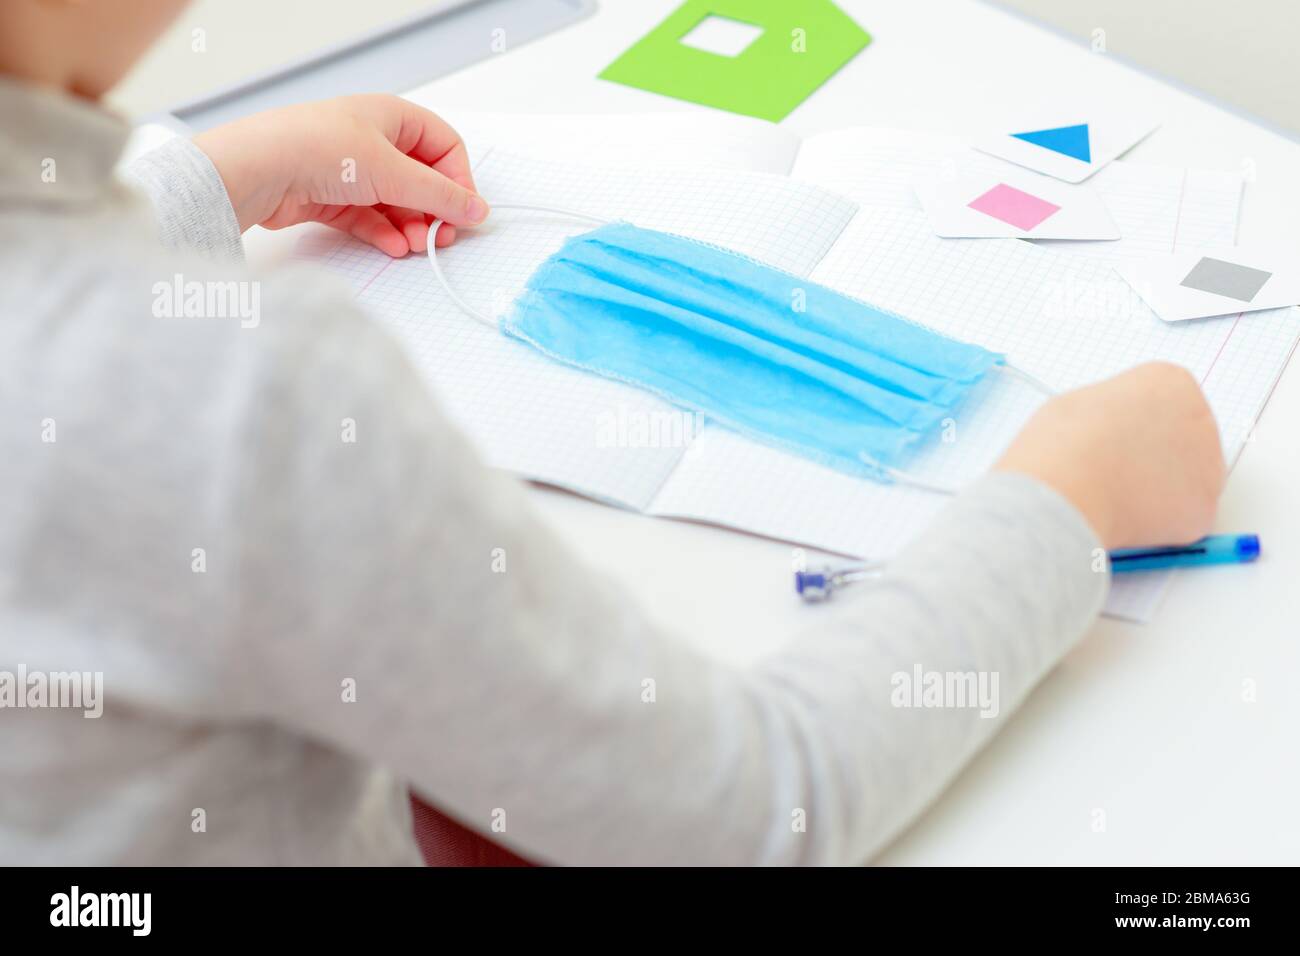 Hands of child holding a medical mask over copybook during studying at home. Home learning concept. Stock Photo